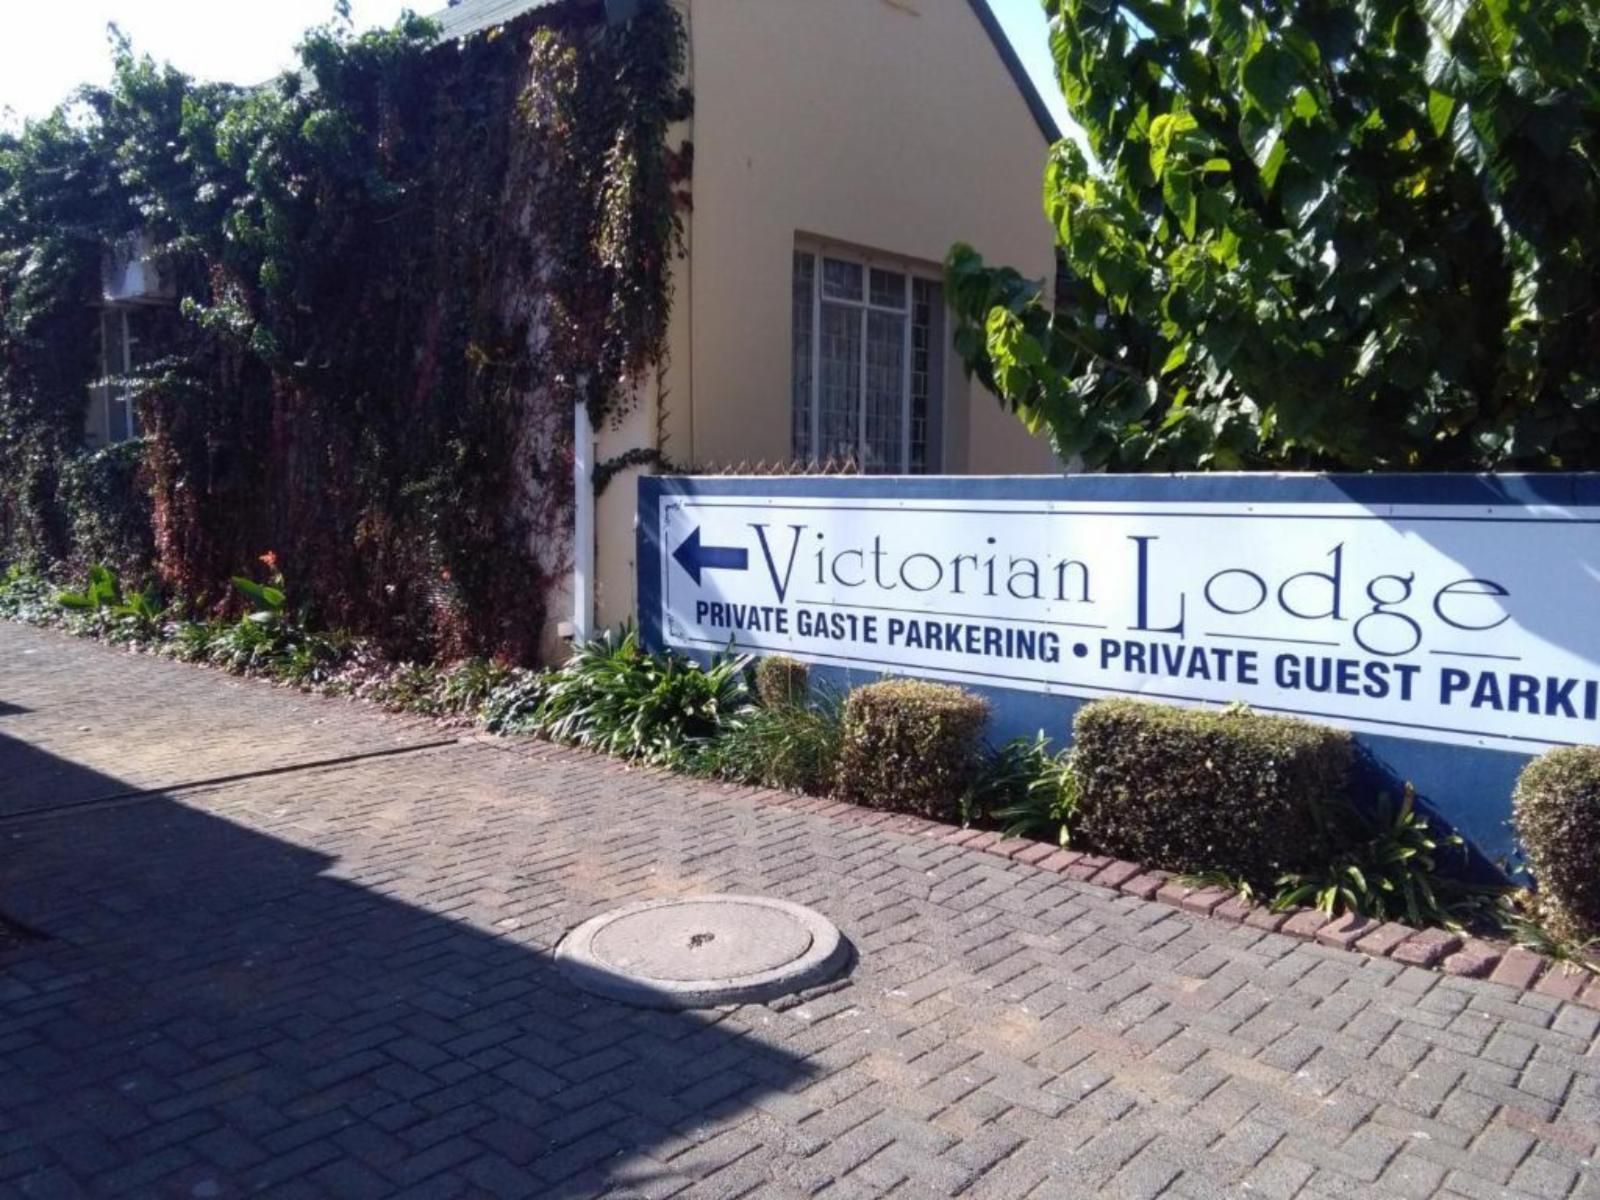 Victorian Lodge Westdene Bloemfontein Bloemfontein Free State South Africa House, Building, Architecture, Palm Tree, Plant, Nature, Wood, Sign, Window